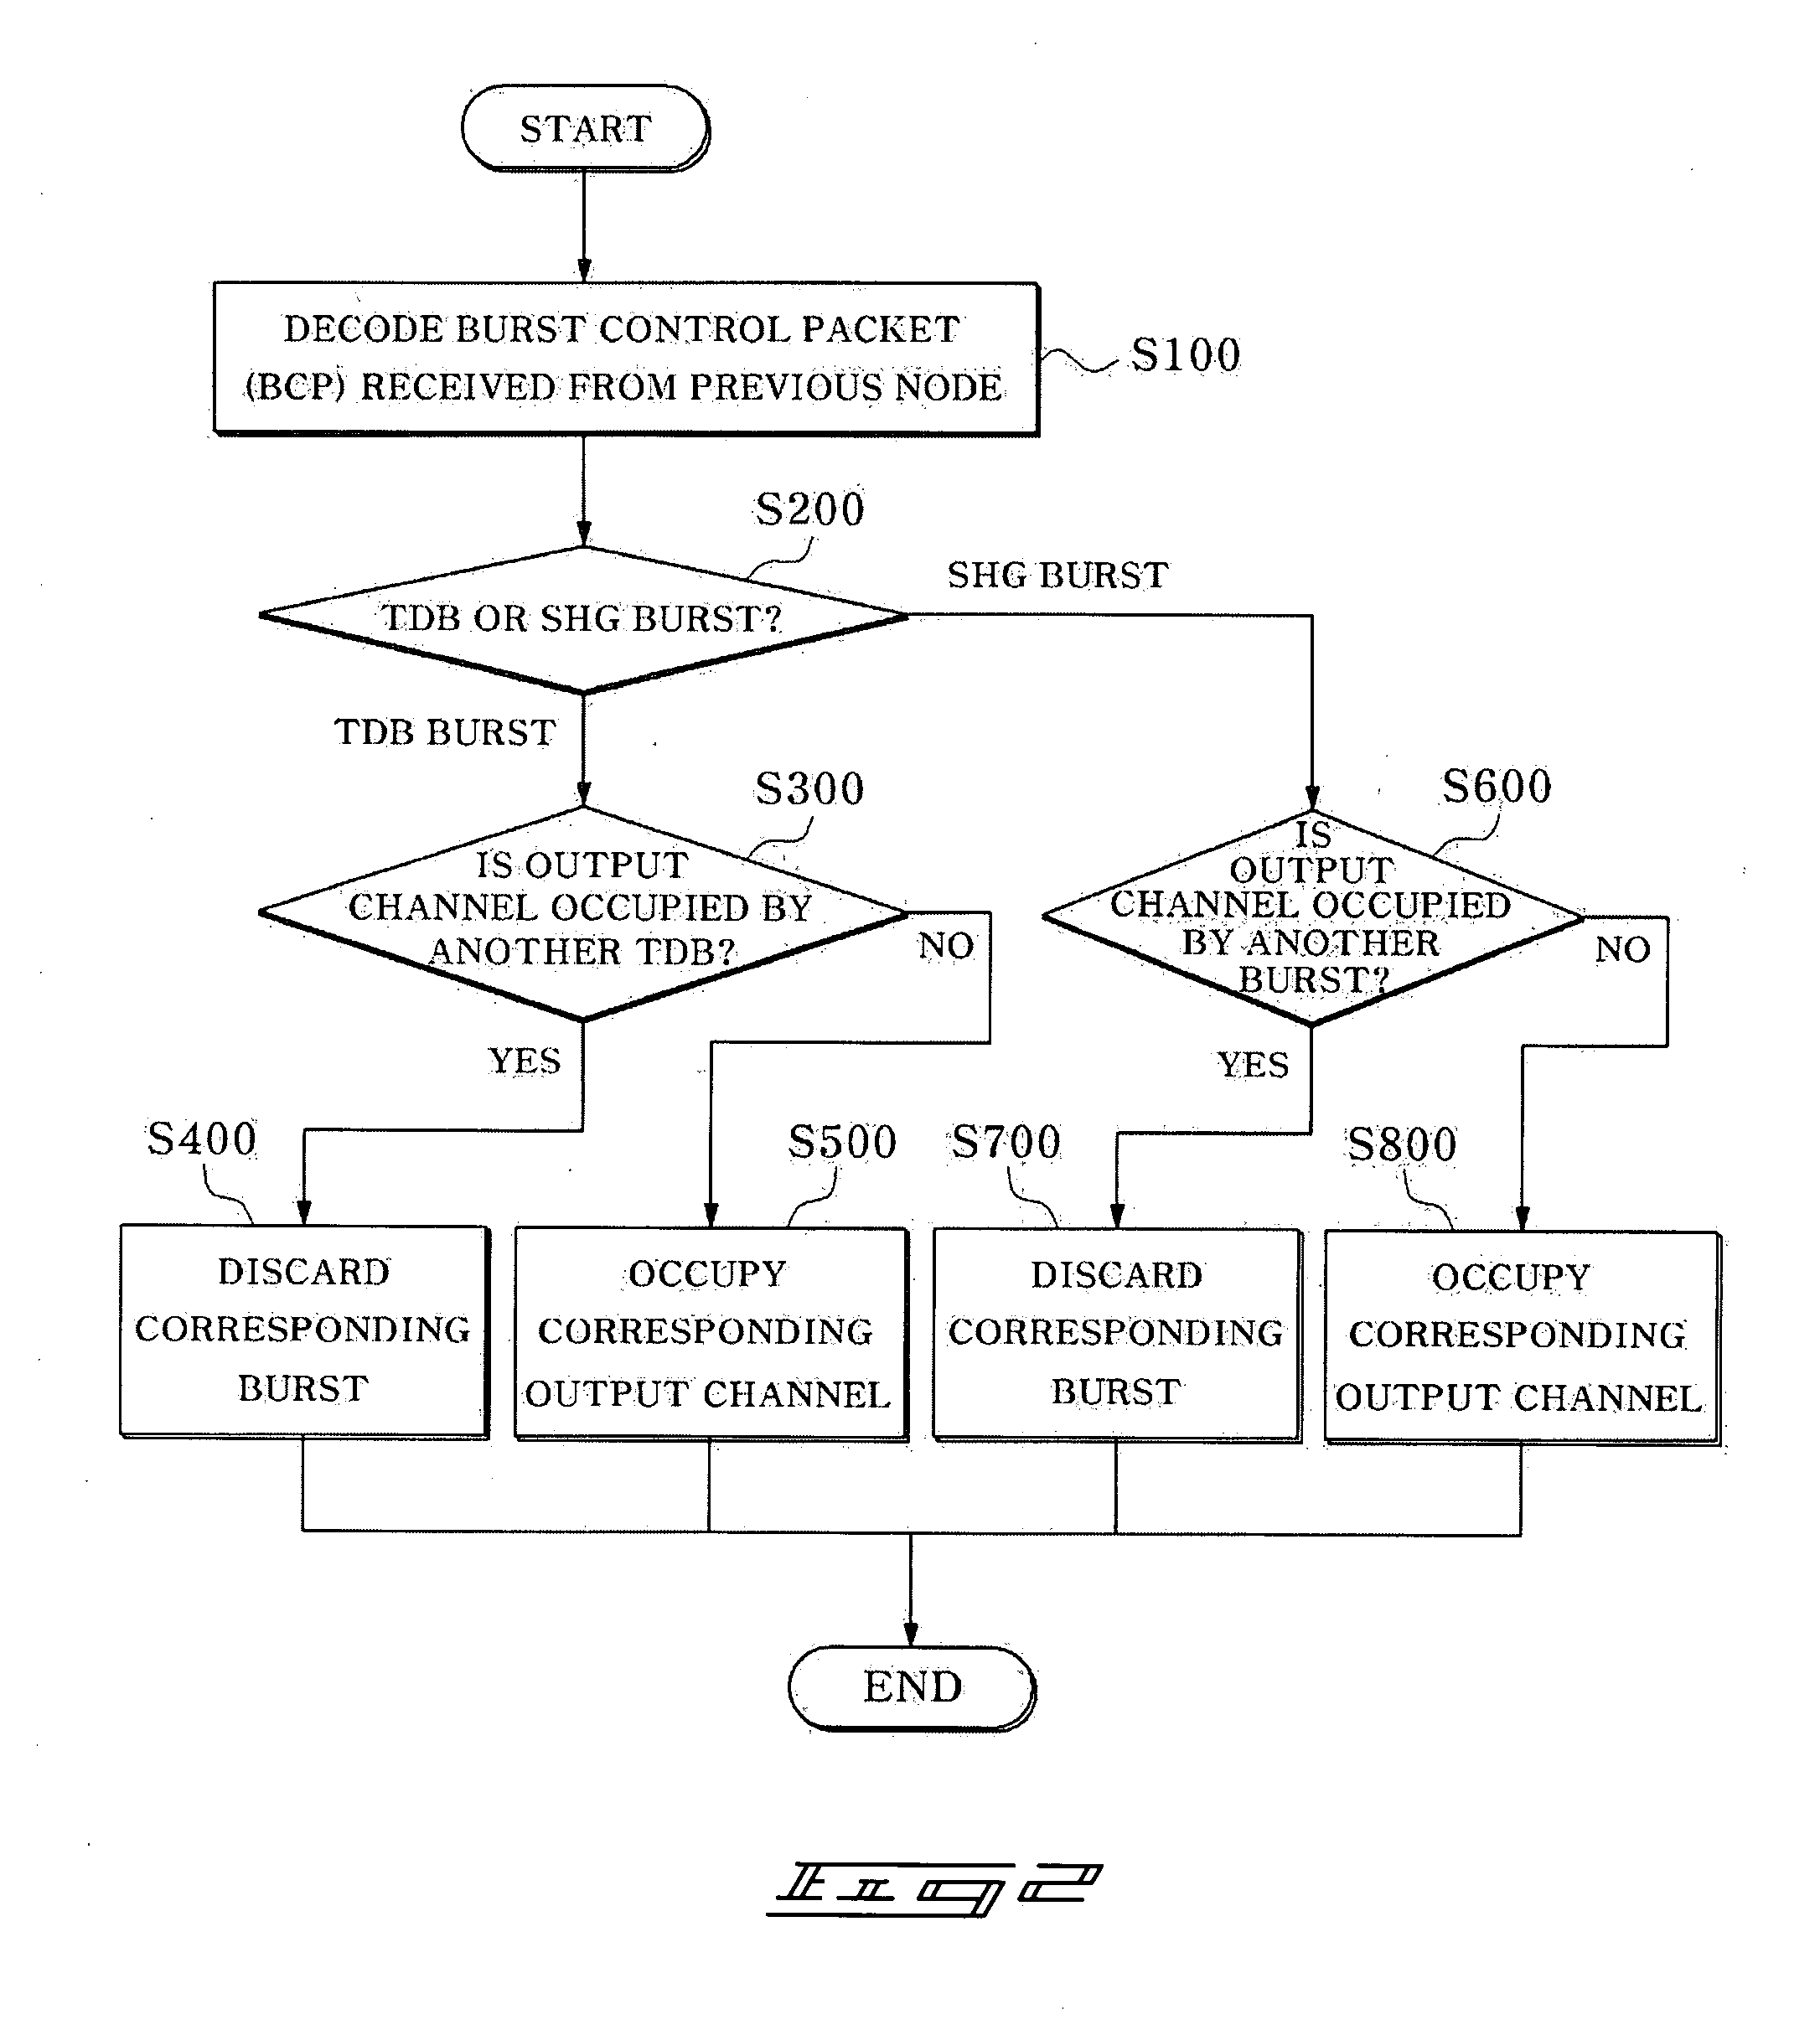 Burst scheduling methods in Optical Burst Switching system